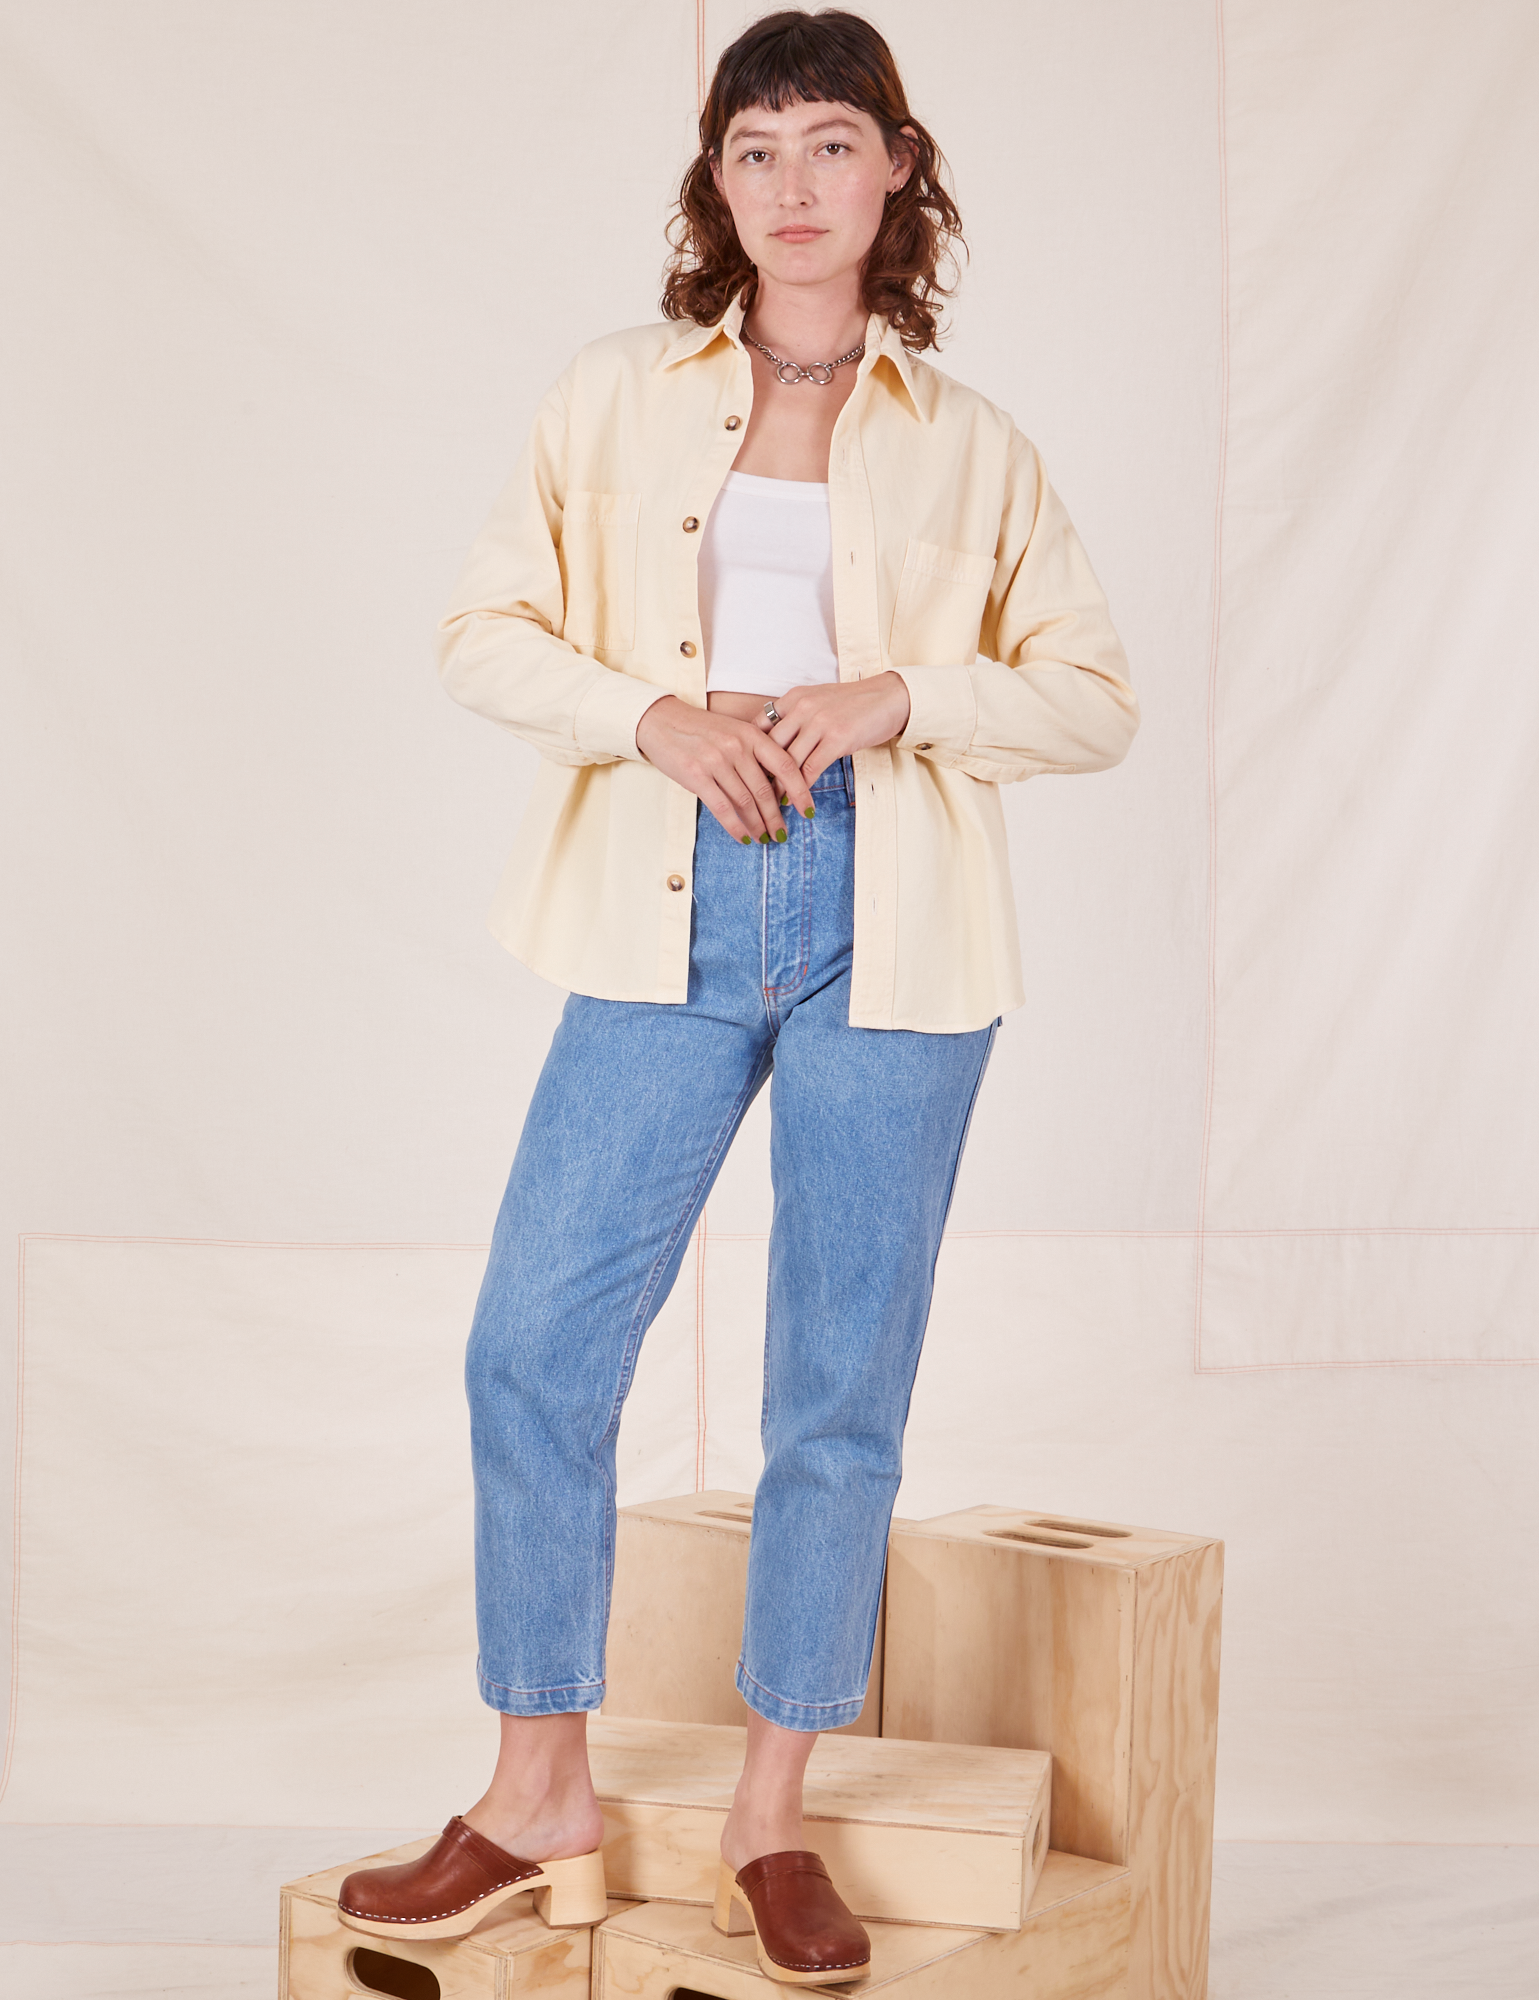 Alex is wearing Oversize Overshirt in Vintage Off-White, Cropped Tank Top in vintage off-white and light wash Frontier Jeans